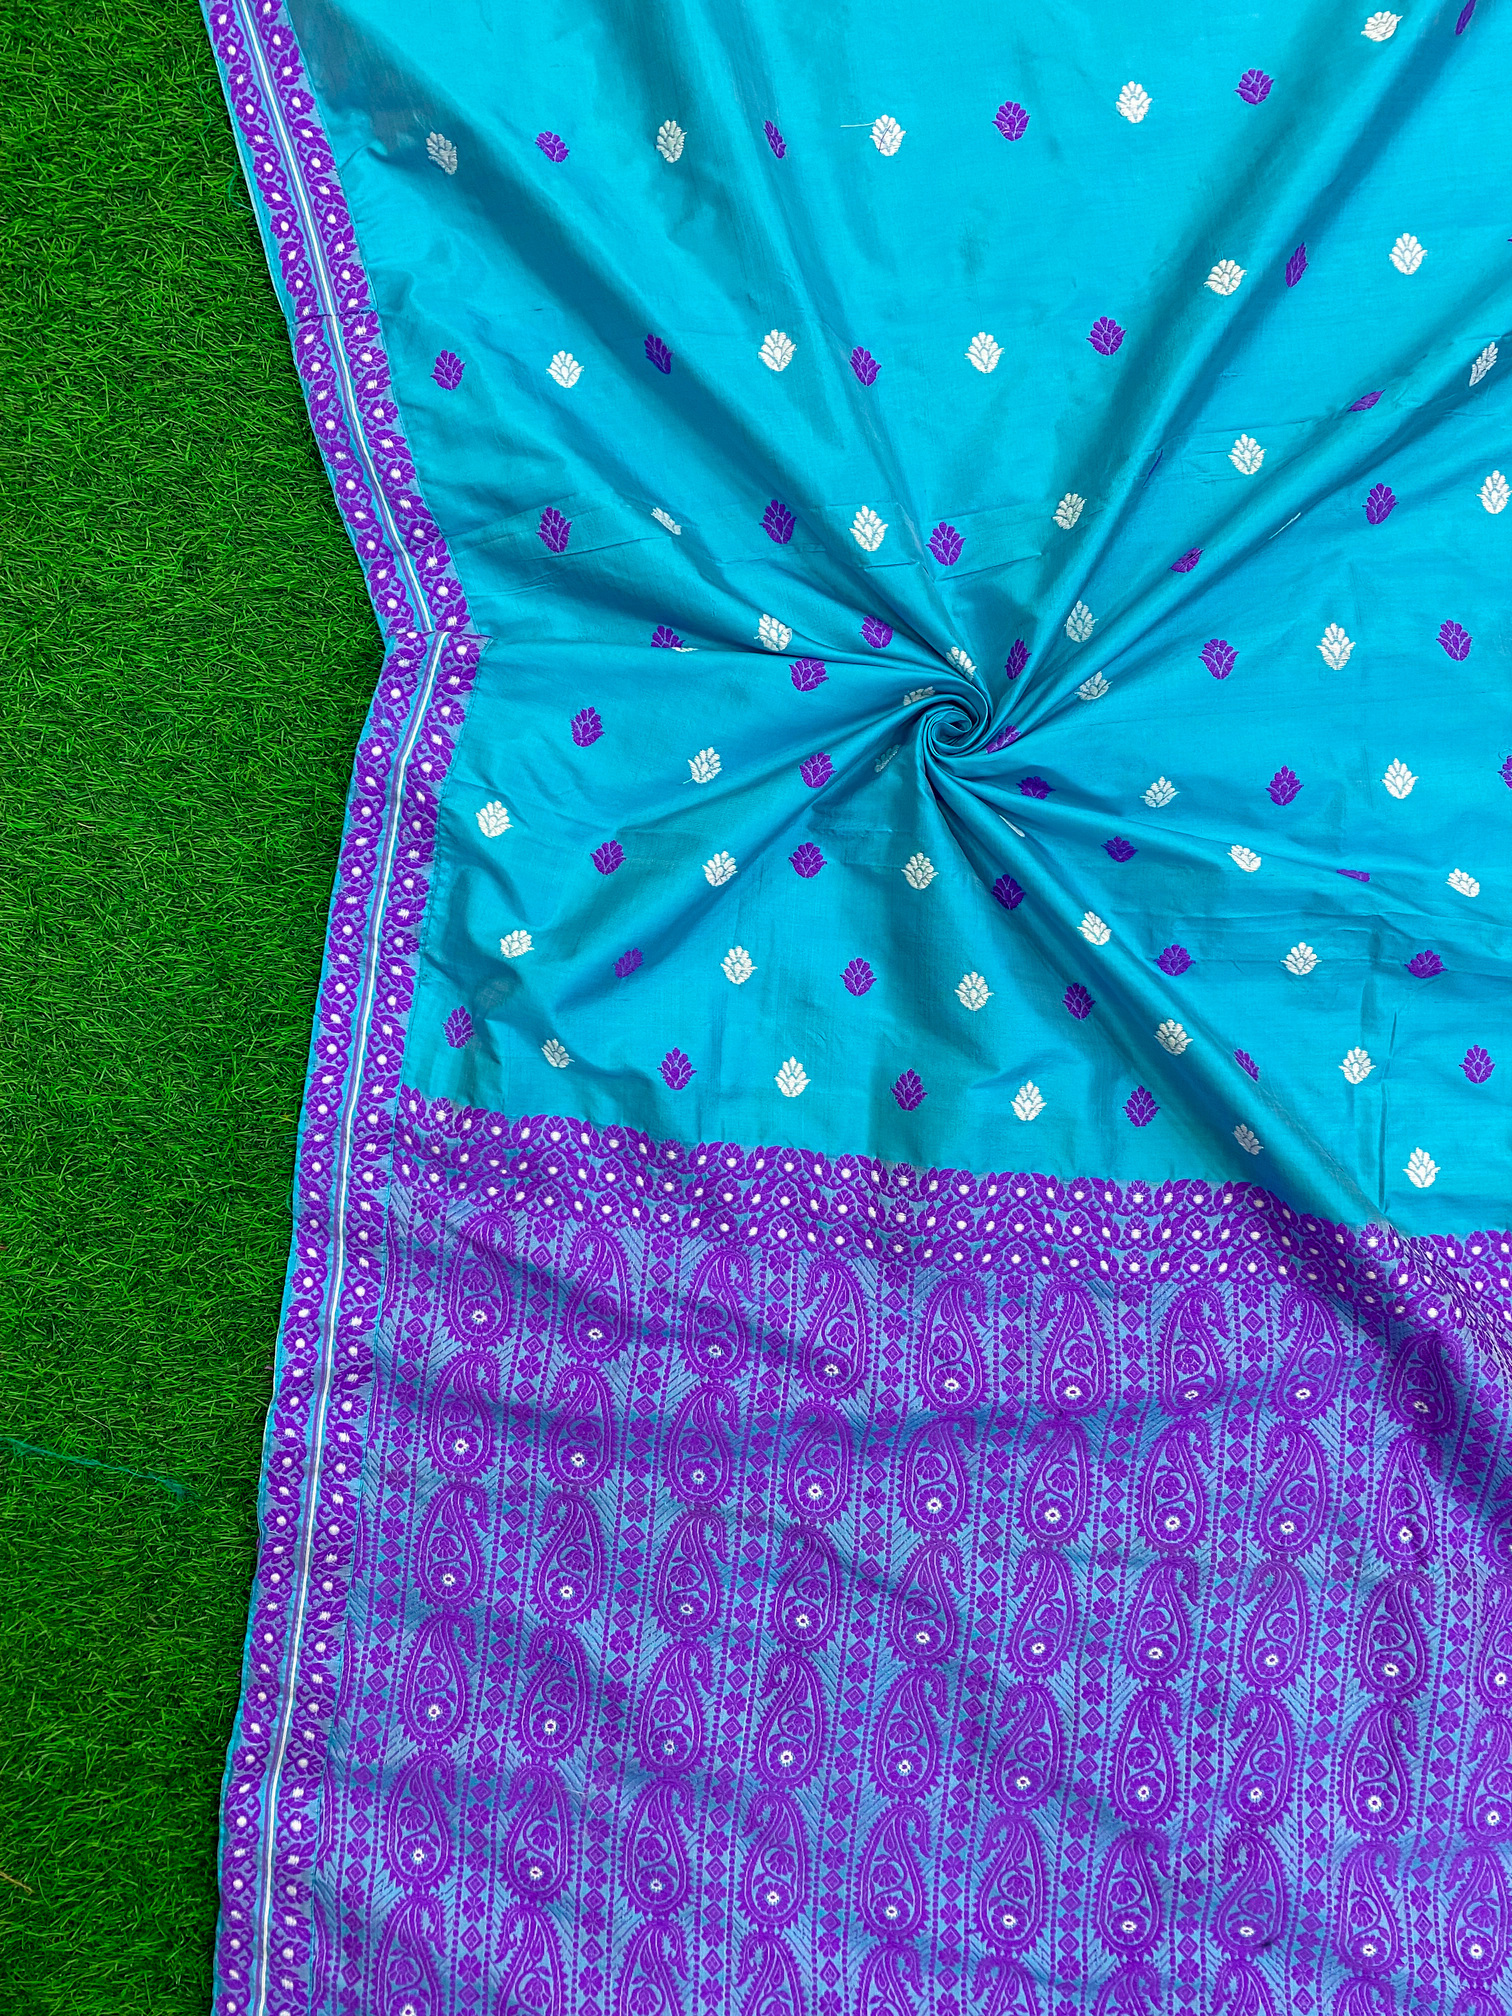 Blue Pure Paat Mulberry Assam Silk Saree with Pink and White Motifs